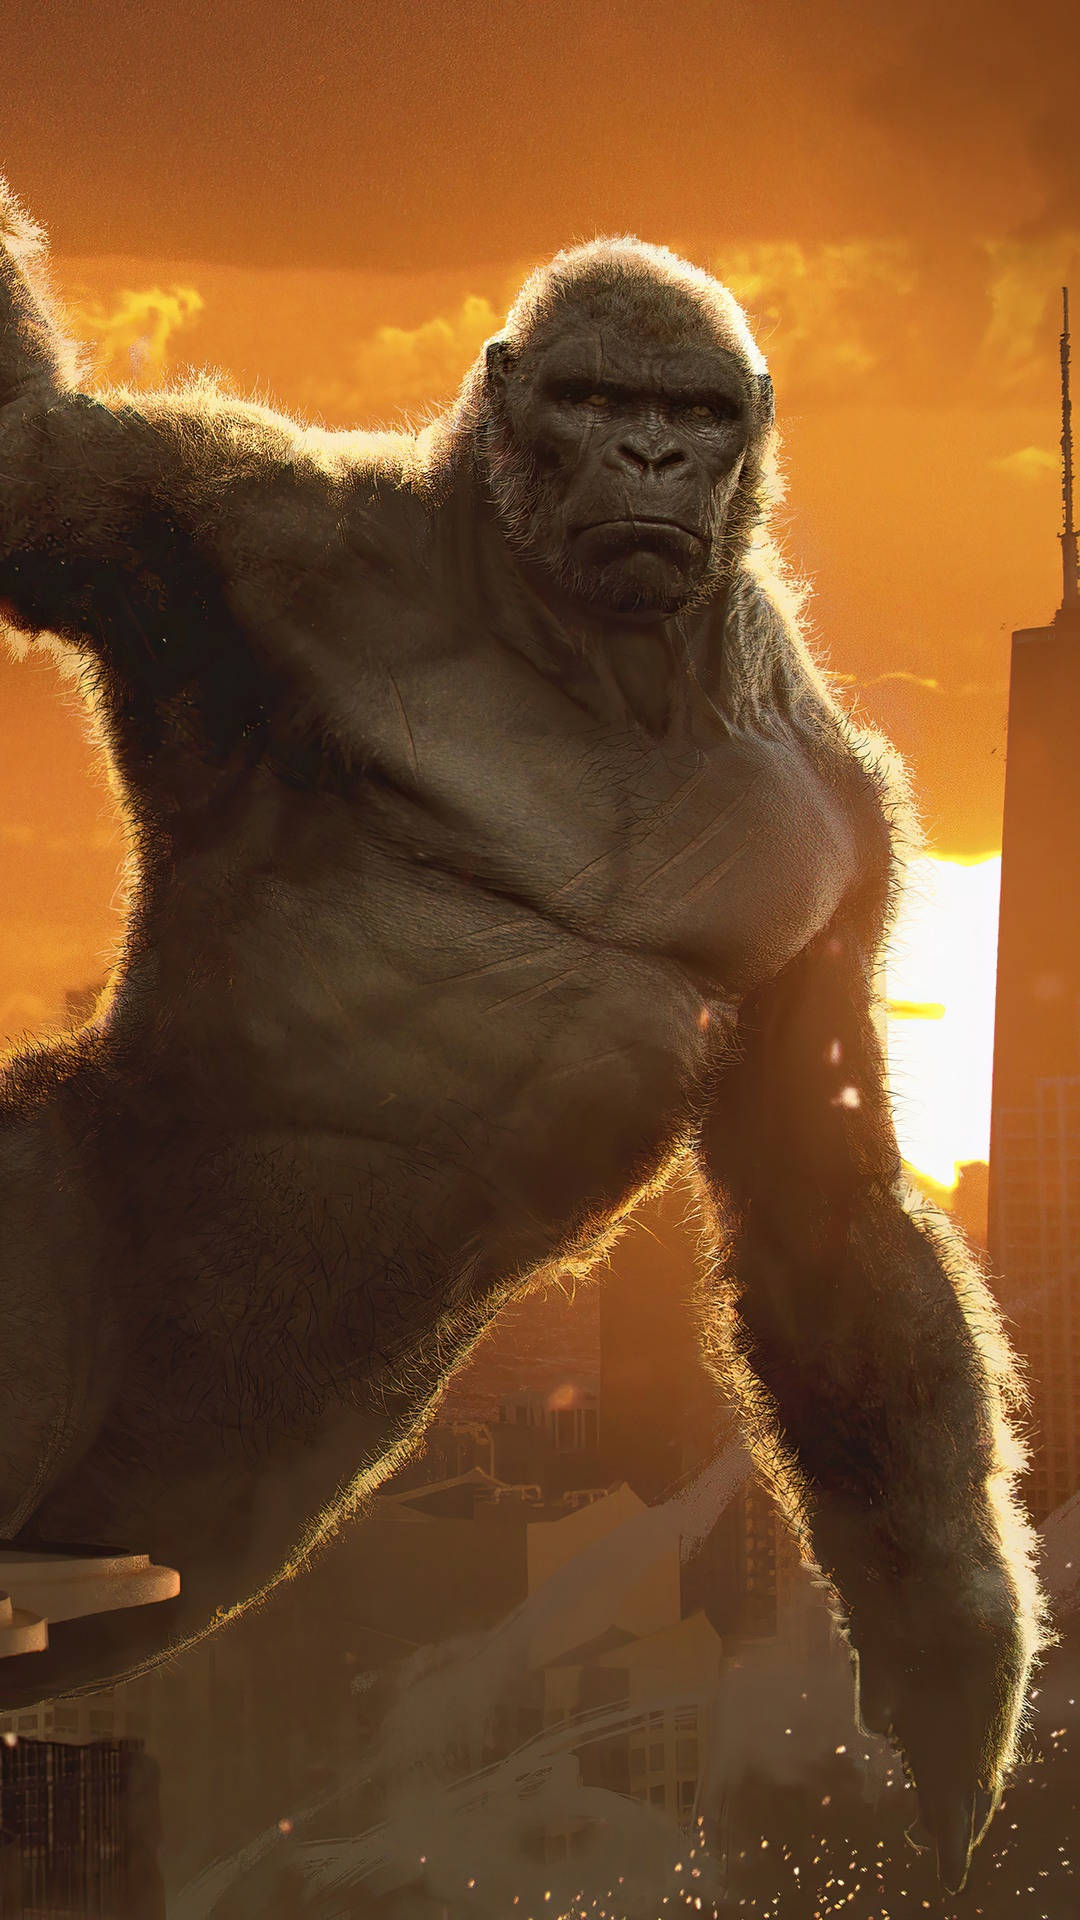 kong - the gorilla is flying over the city Wallpaper